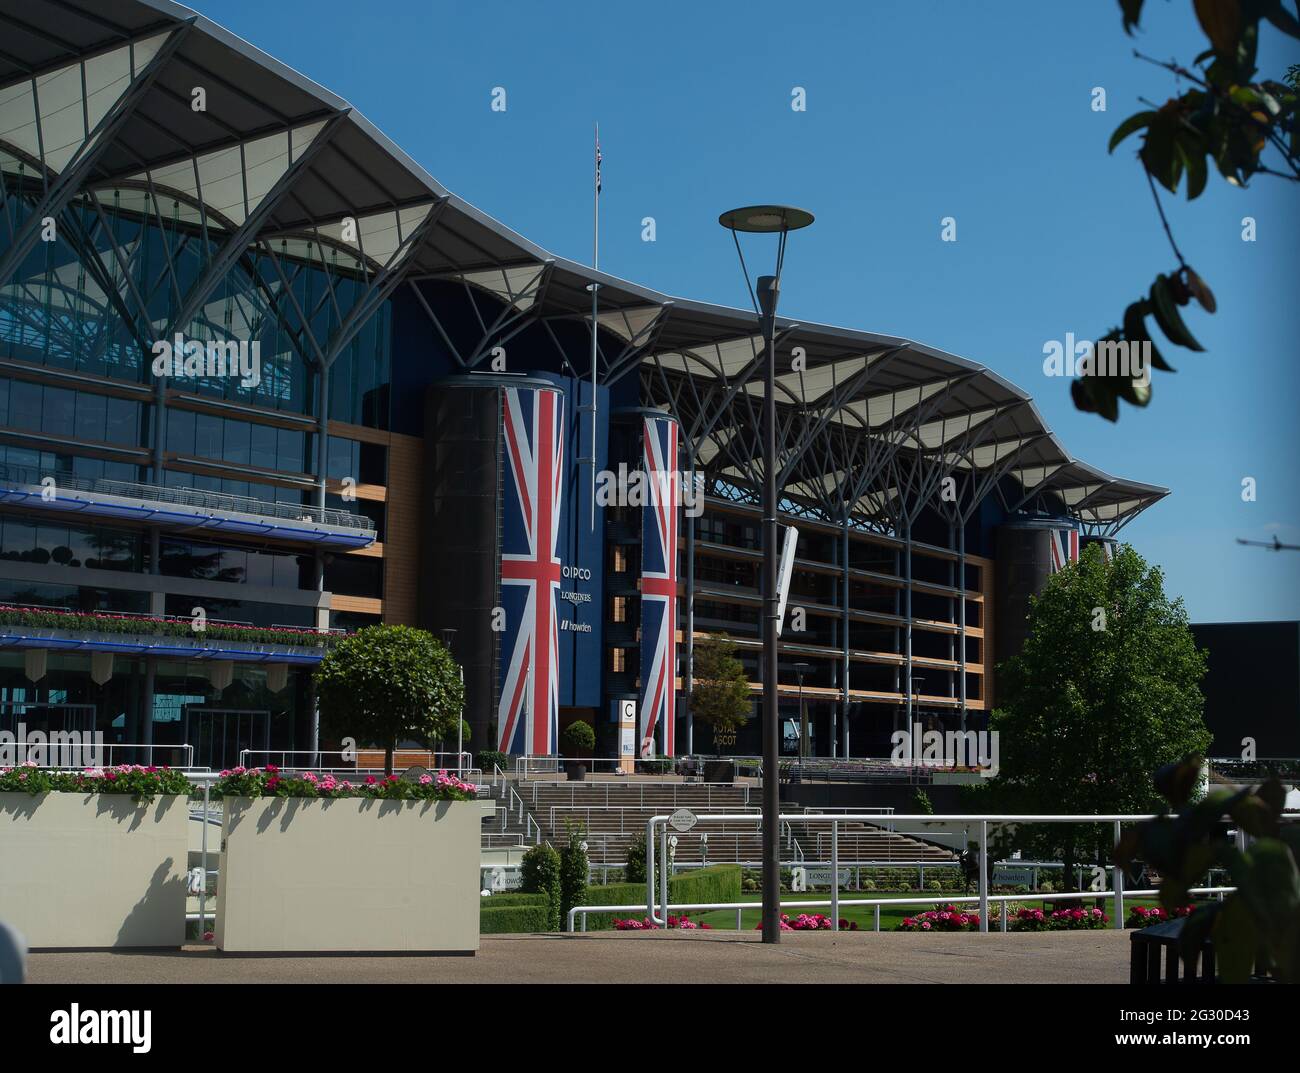 Ascot, Berkshire, UK. 13th June, 2021. The Grandstand at Ascot Racecourse. Preparations are well underway for the world famous Royal Ascot racing event. Racing fans are delighted to be able to return to Royal Ascot this year, however, due to the ongoing Covid-19 lockdown restrictions, the number of guests are limited to 12,000 ticketed guests each day. Racegoers will also be required to produce a negative Covid-19 test. Credit: Maureen McLean/Alamy Stock Photo